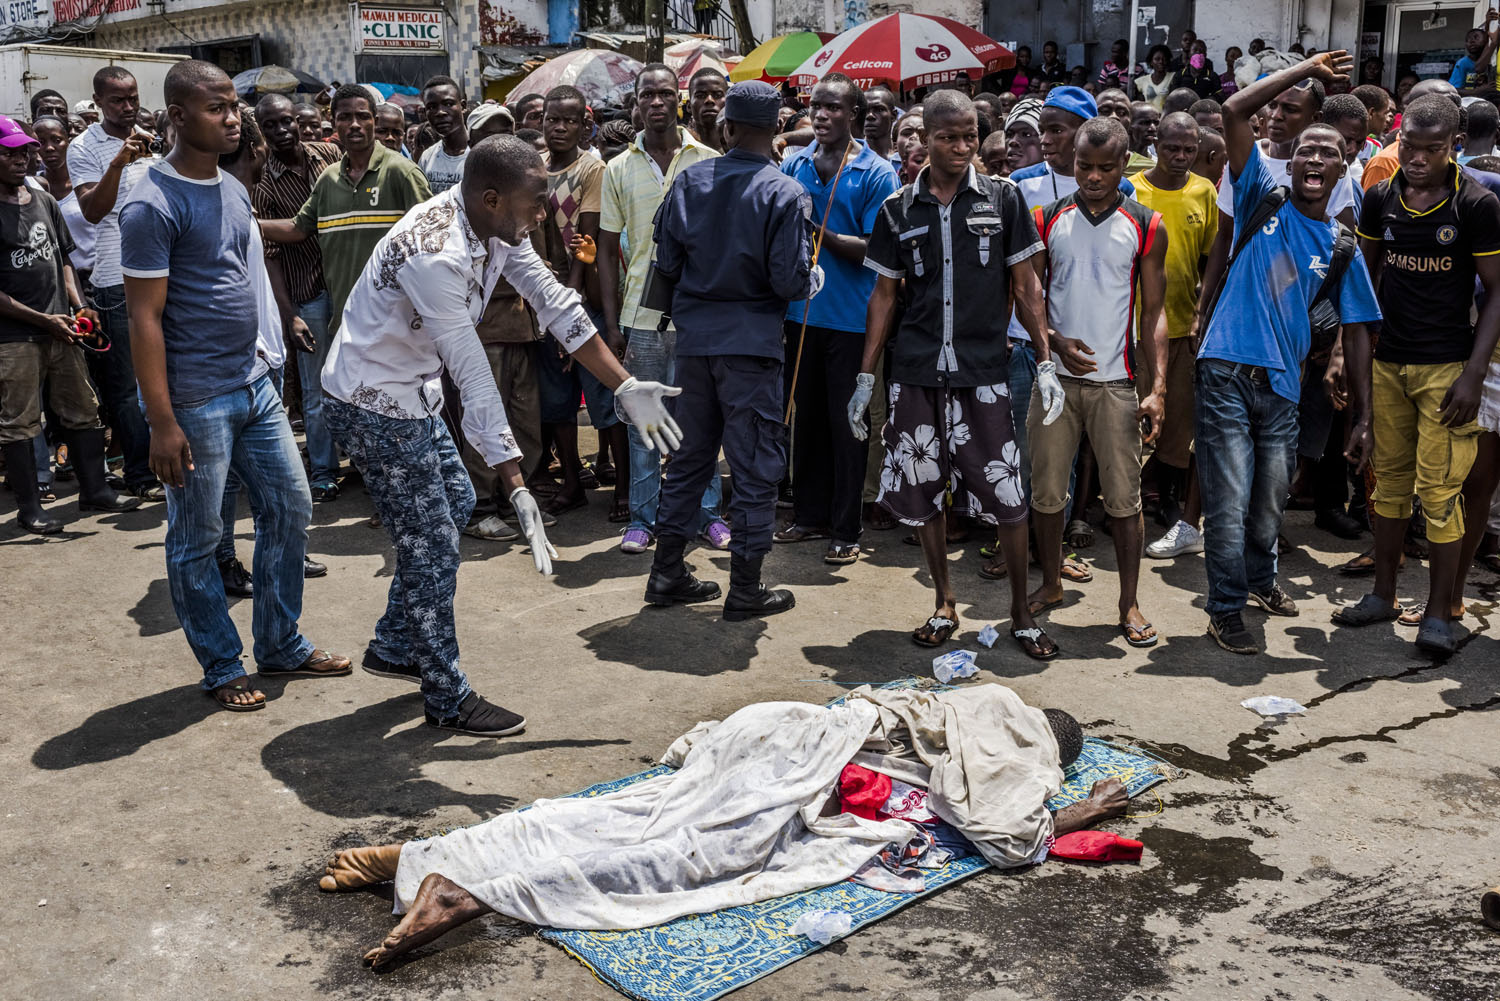 Residents look on as the body of a man suspected of dying from Ebola lies in a busy street, after it was reportedly dragged there to draw attention of burial teams following days of failed attempts by his family to have his body picked up, in Monrovia, Liberia, Sept. 15, 2014.